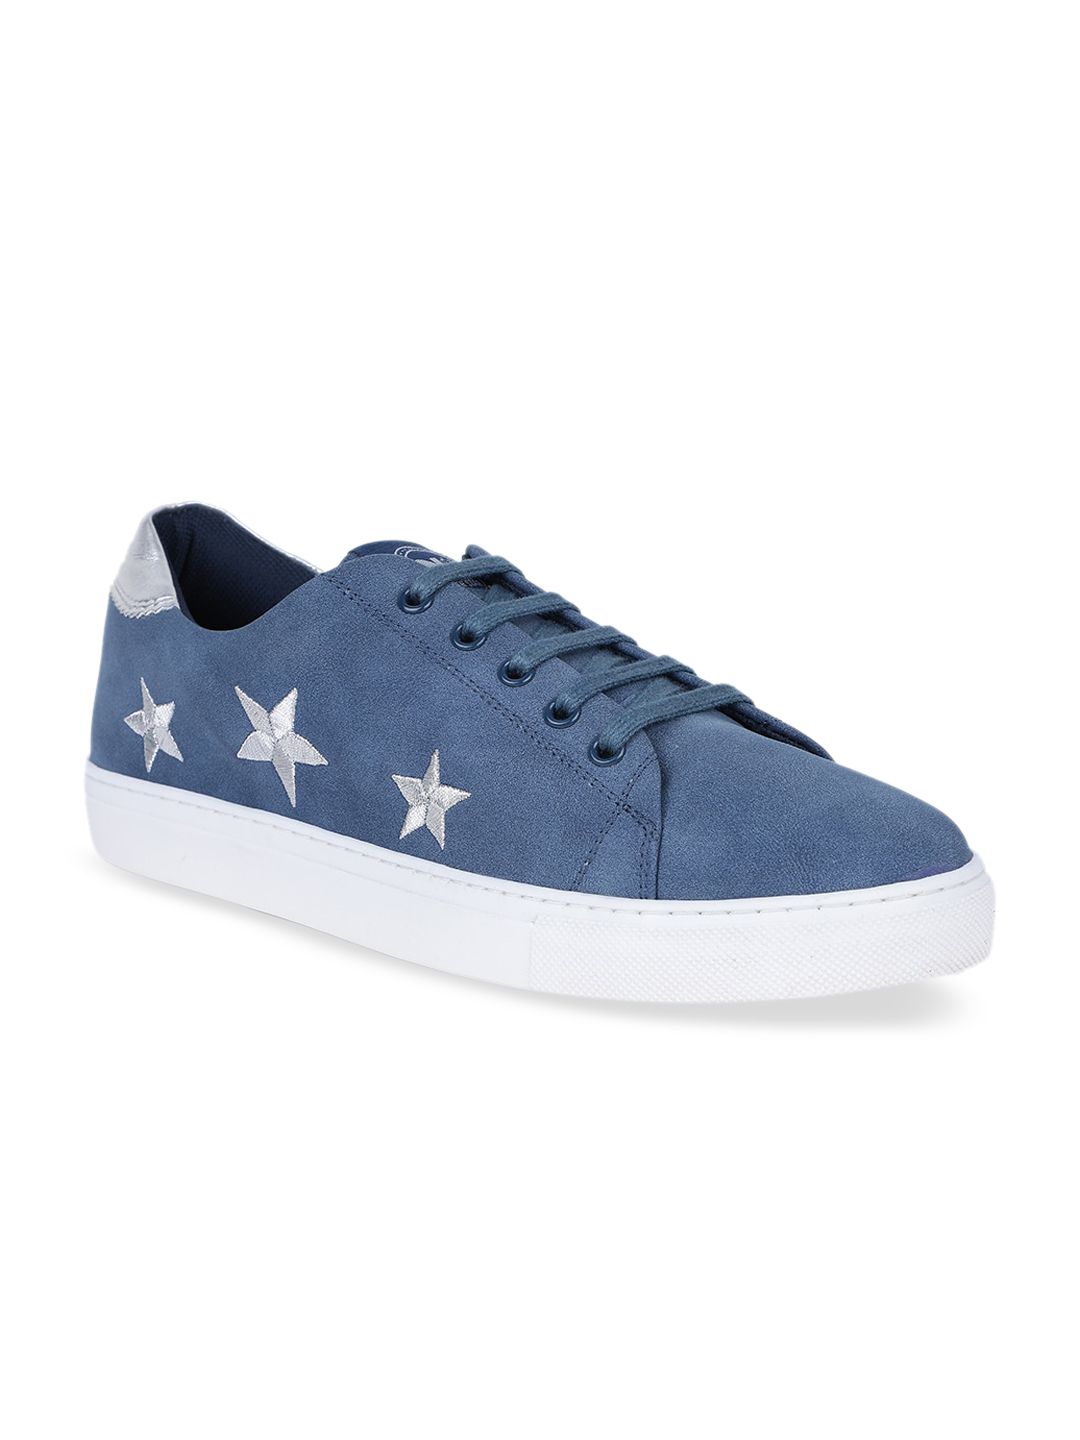 North Star Women Blue Sneakers Price in India